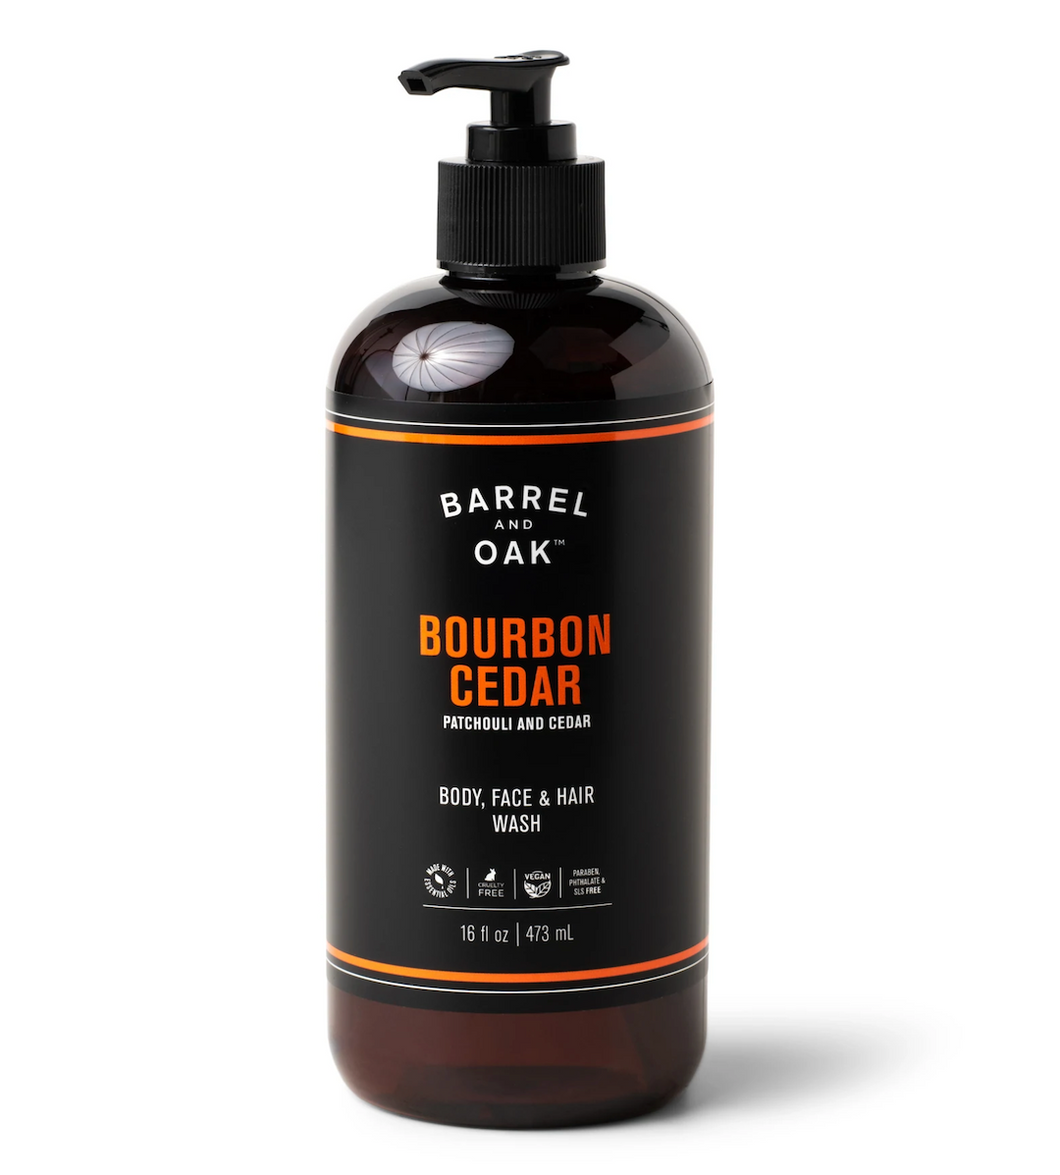 Barrel and Oak™ Hair, Face, and Body All-in-One Wash - Bourbon Cedar